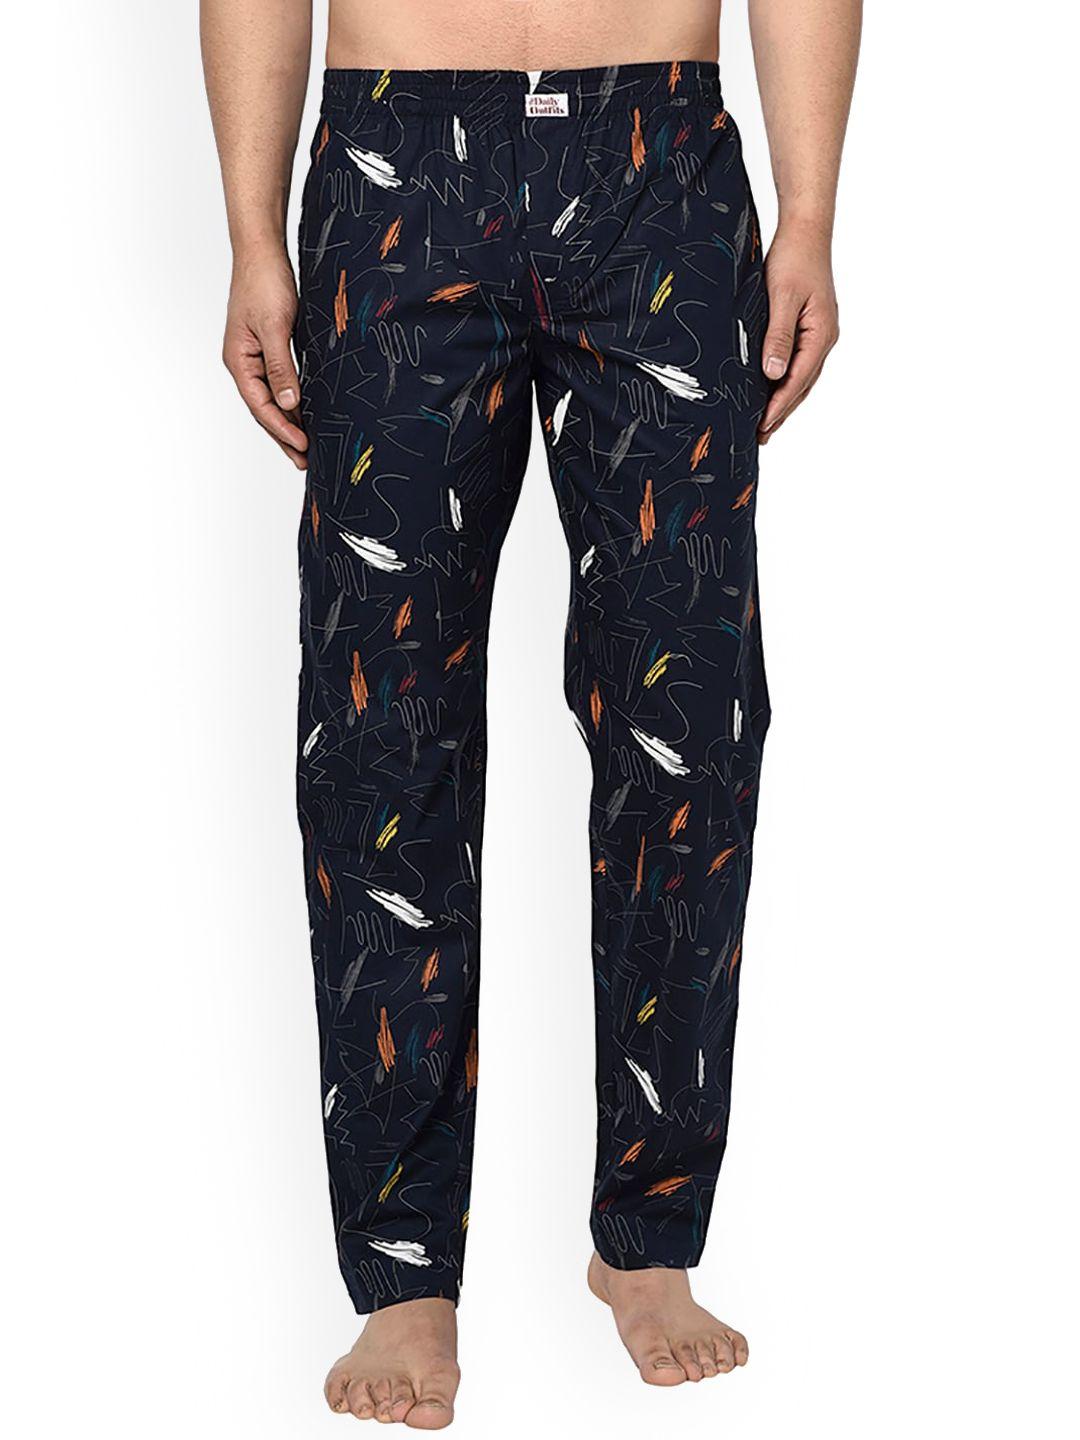 the daily outfits men navy blue printed cotton lounge pants